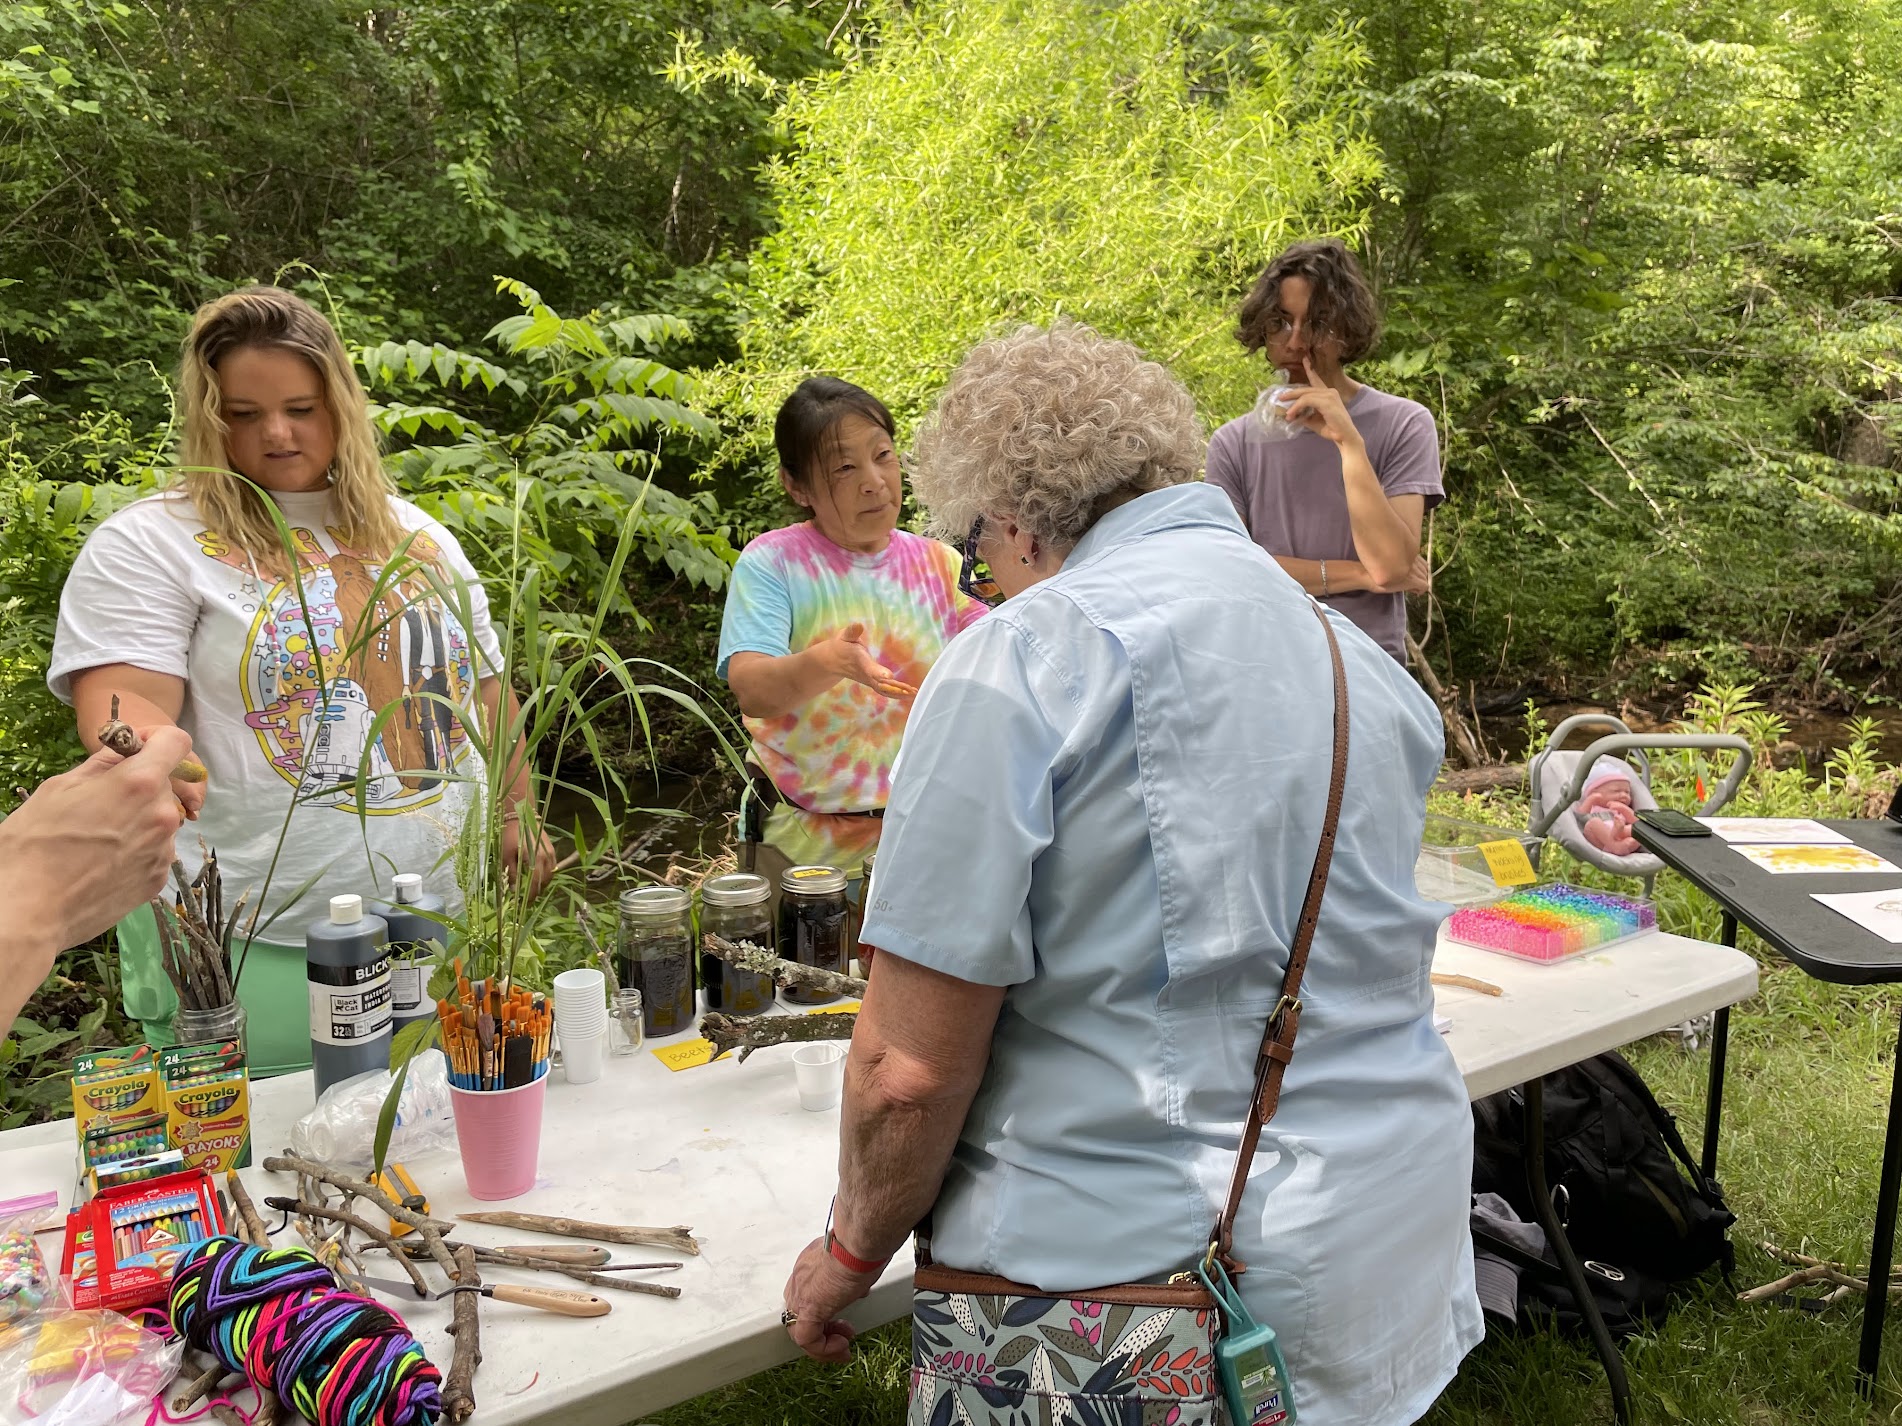 A group of diverse people stand around a white folding table. The table contains everything from paint paintbrushes, yarn, crayons, and sticks. In the center, an Asian woman in a tie-dye shirt speaks to an older woman in a short sleeve, light blue shirt. 